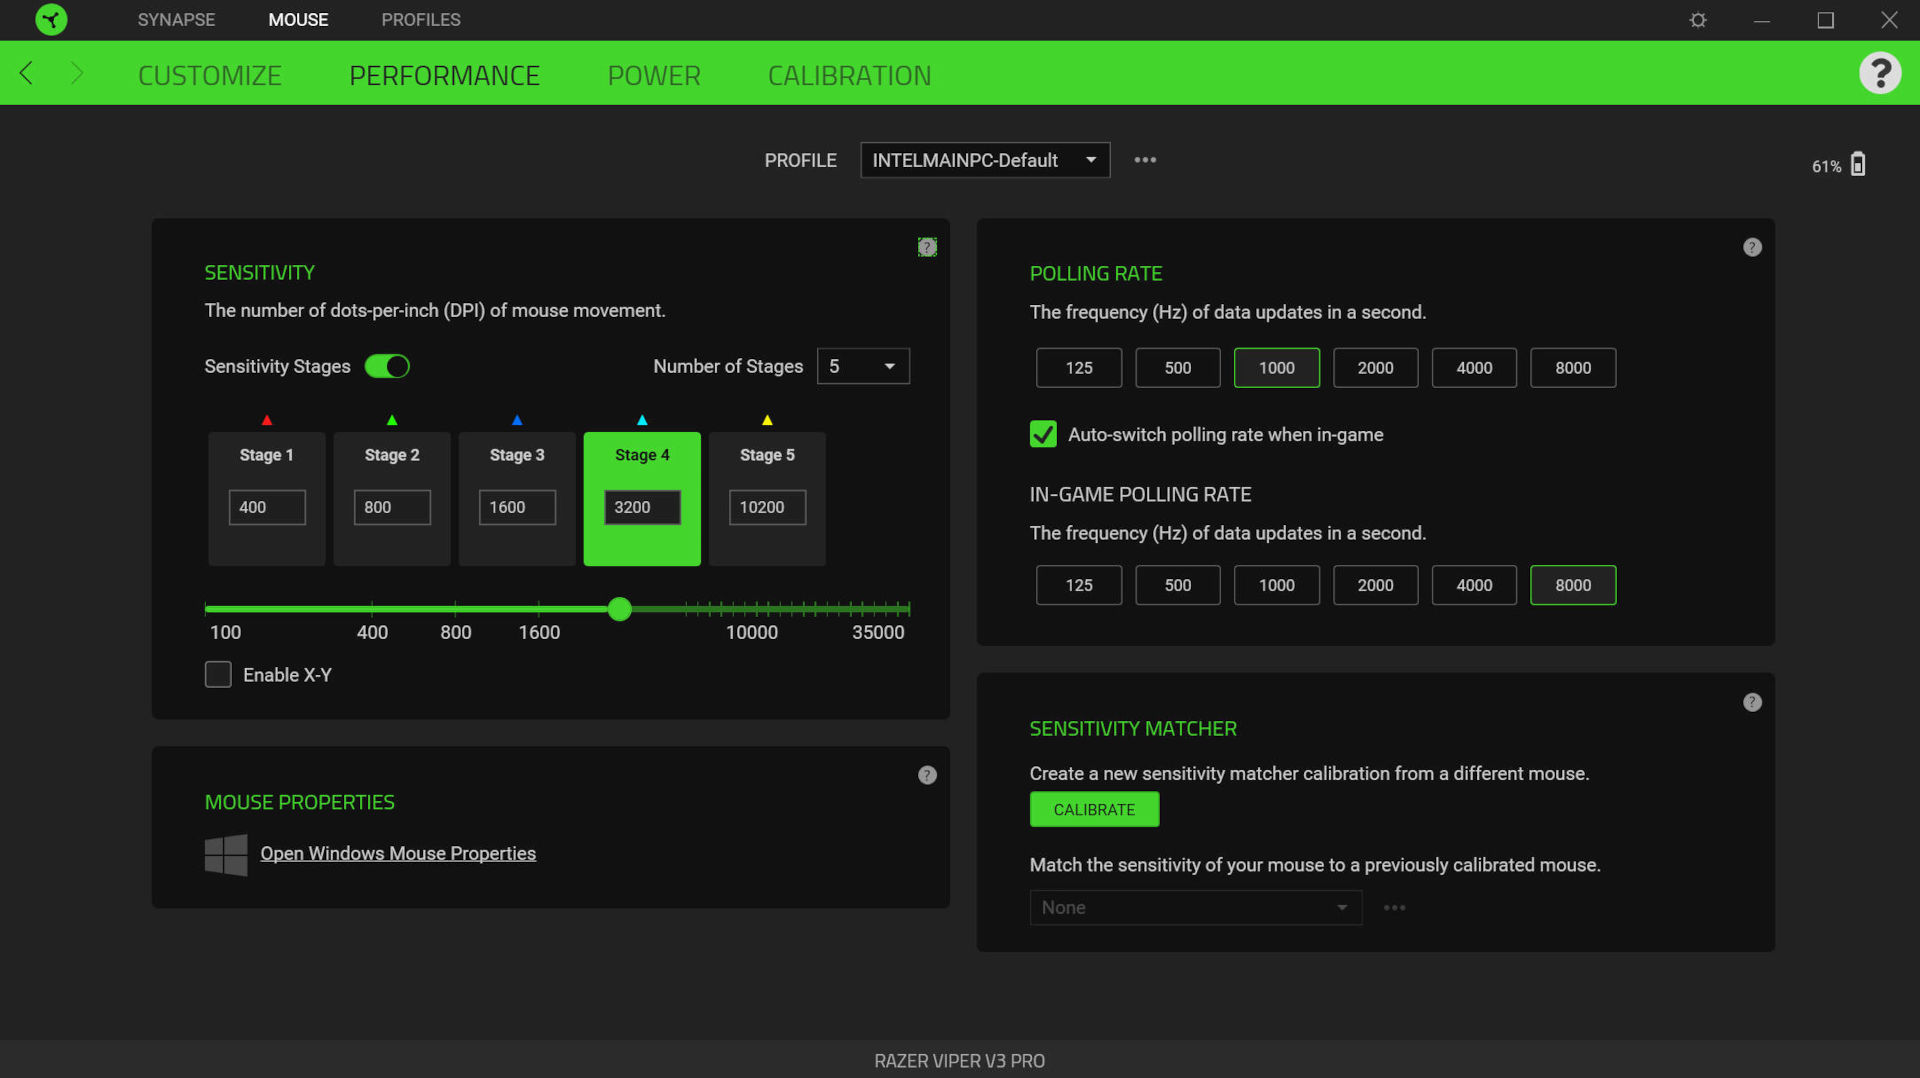 Screenshot of Razer's Synapse software, showing the performance tab for a Viper V3 Pro gaming mouse